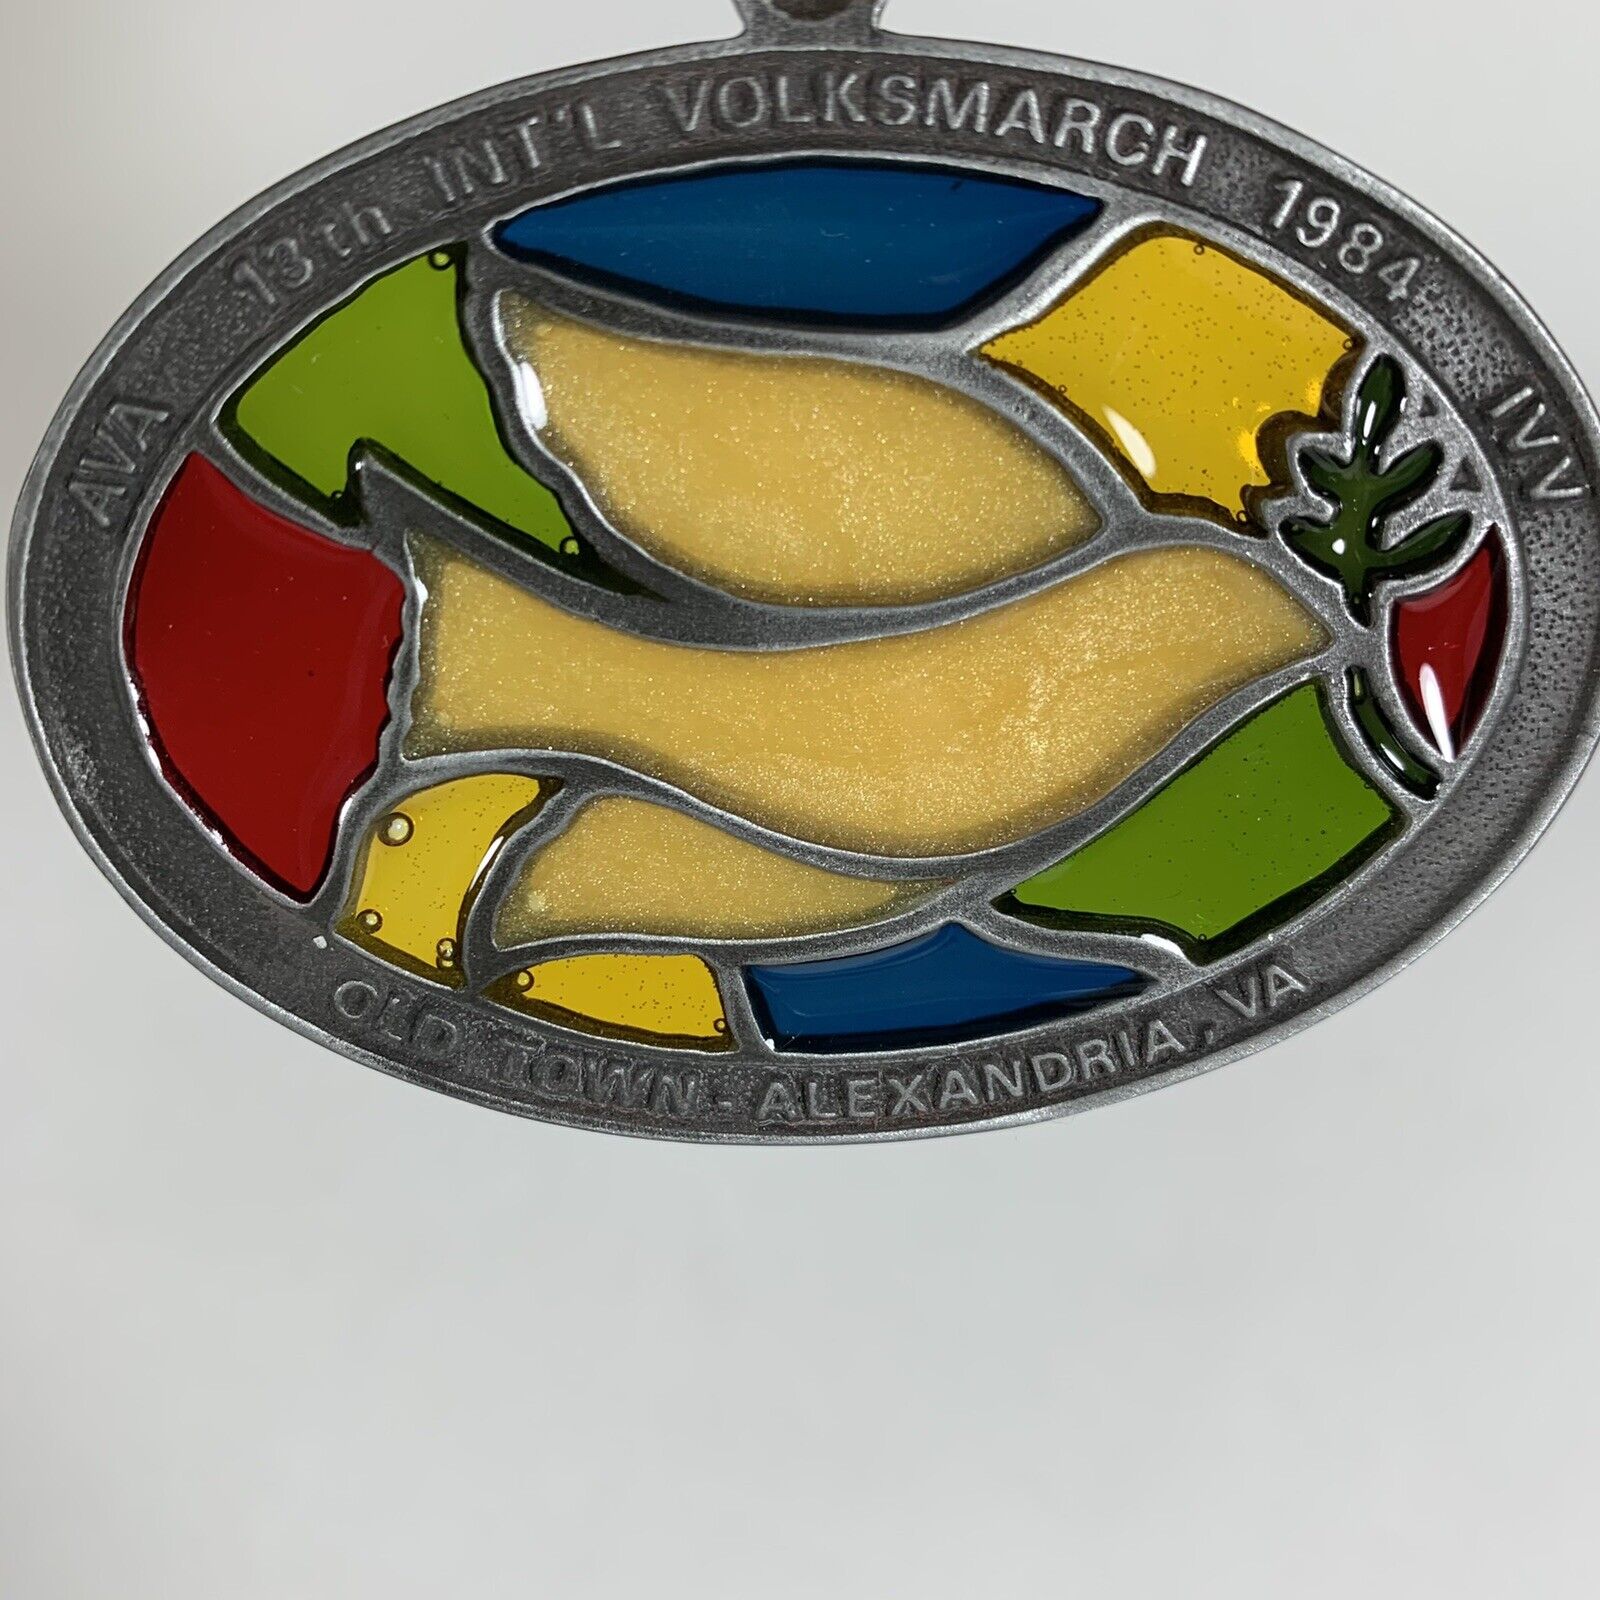 1984 IVV AVA 13th Int. Volksmarch - Old Town Alexandria VA Metal Stained Glass